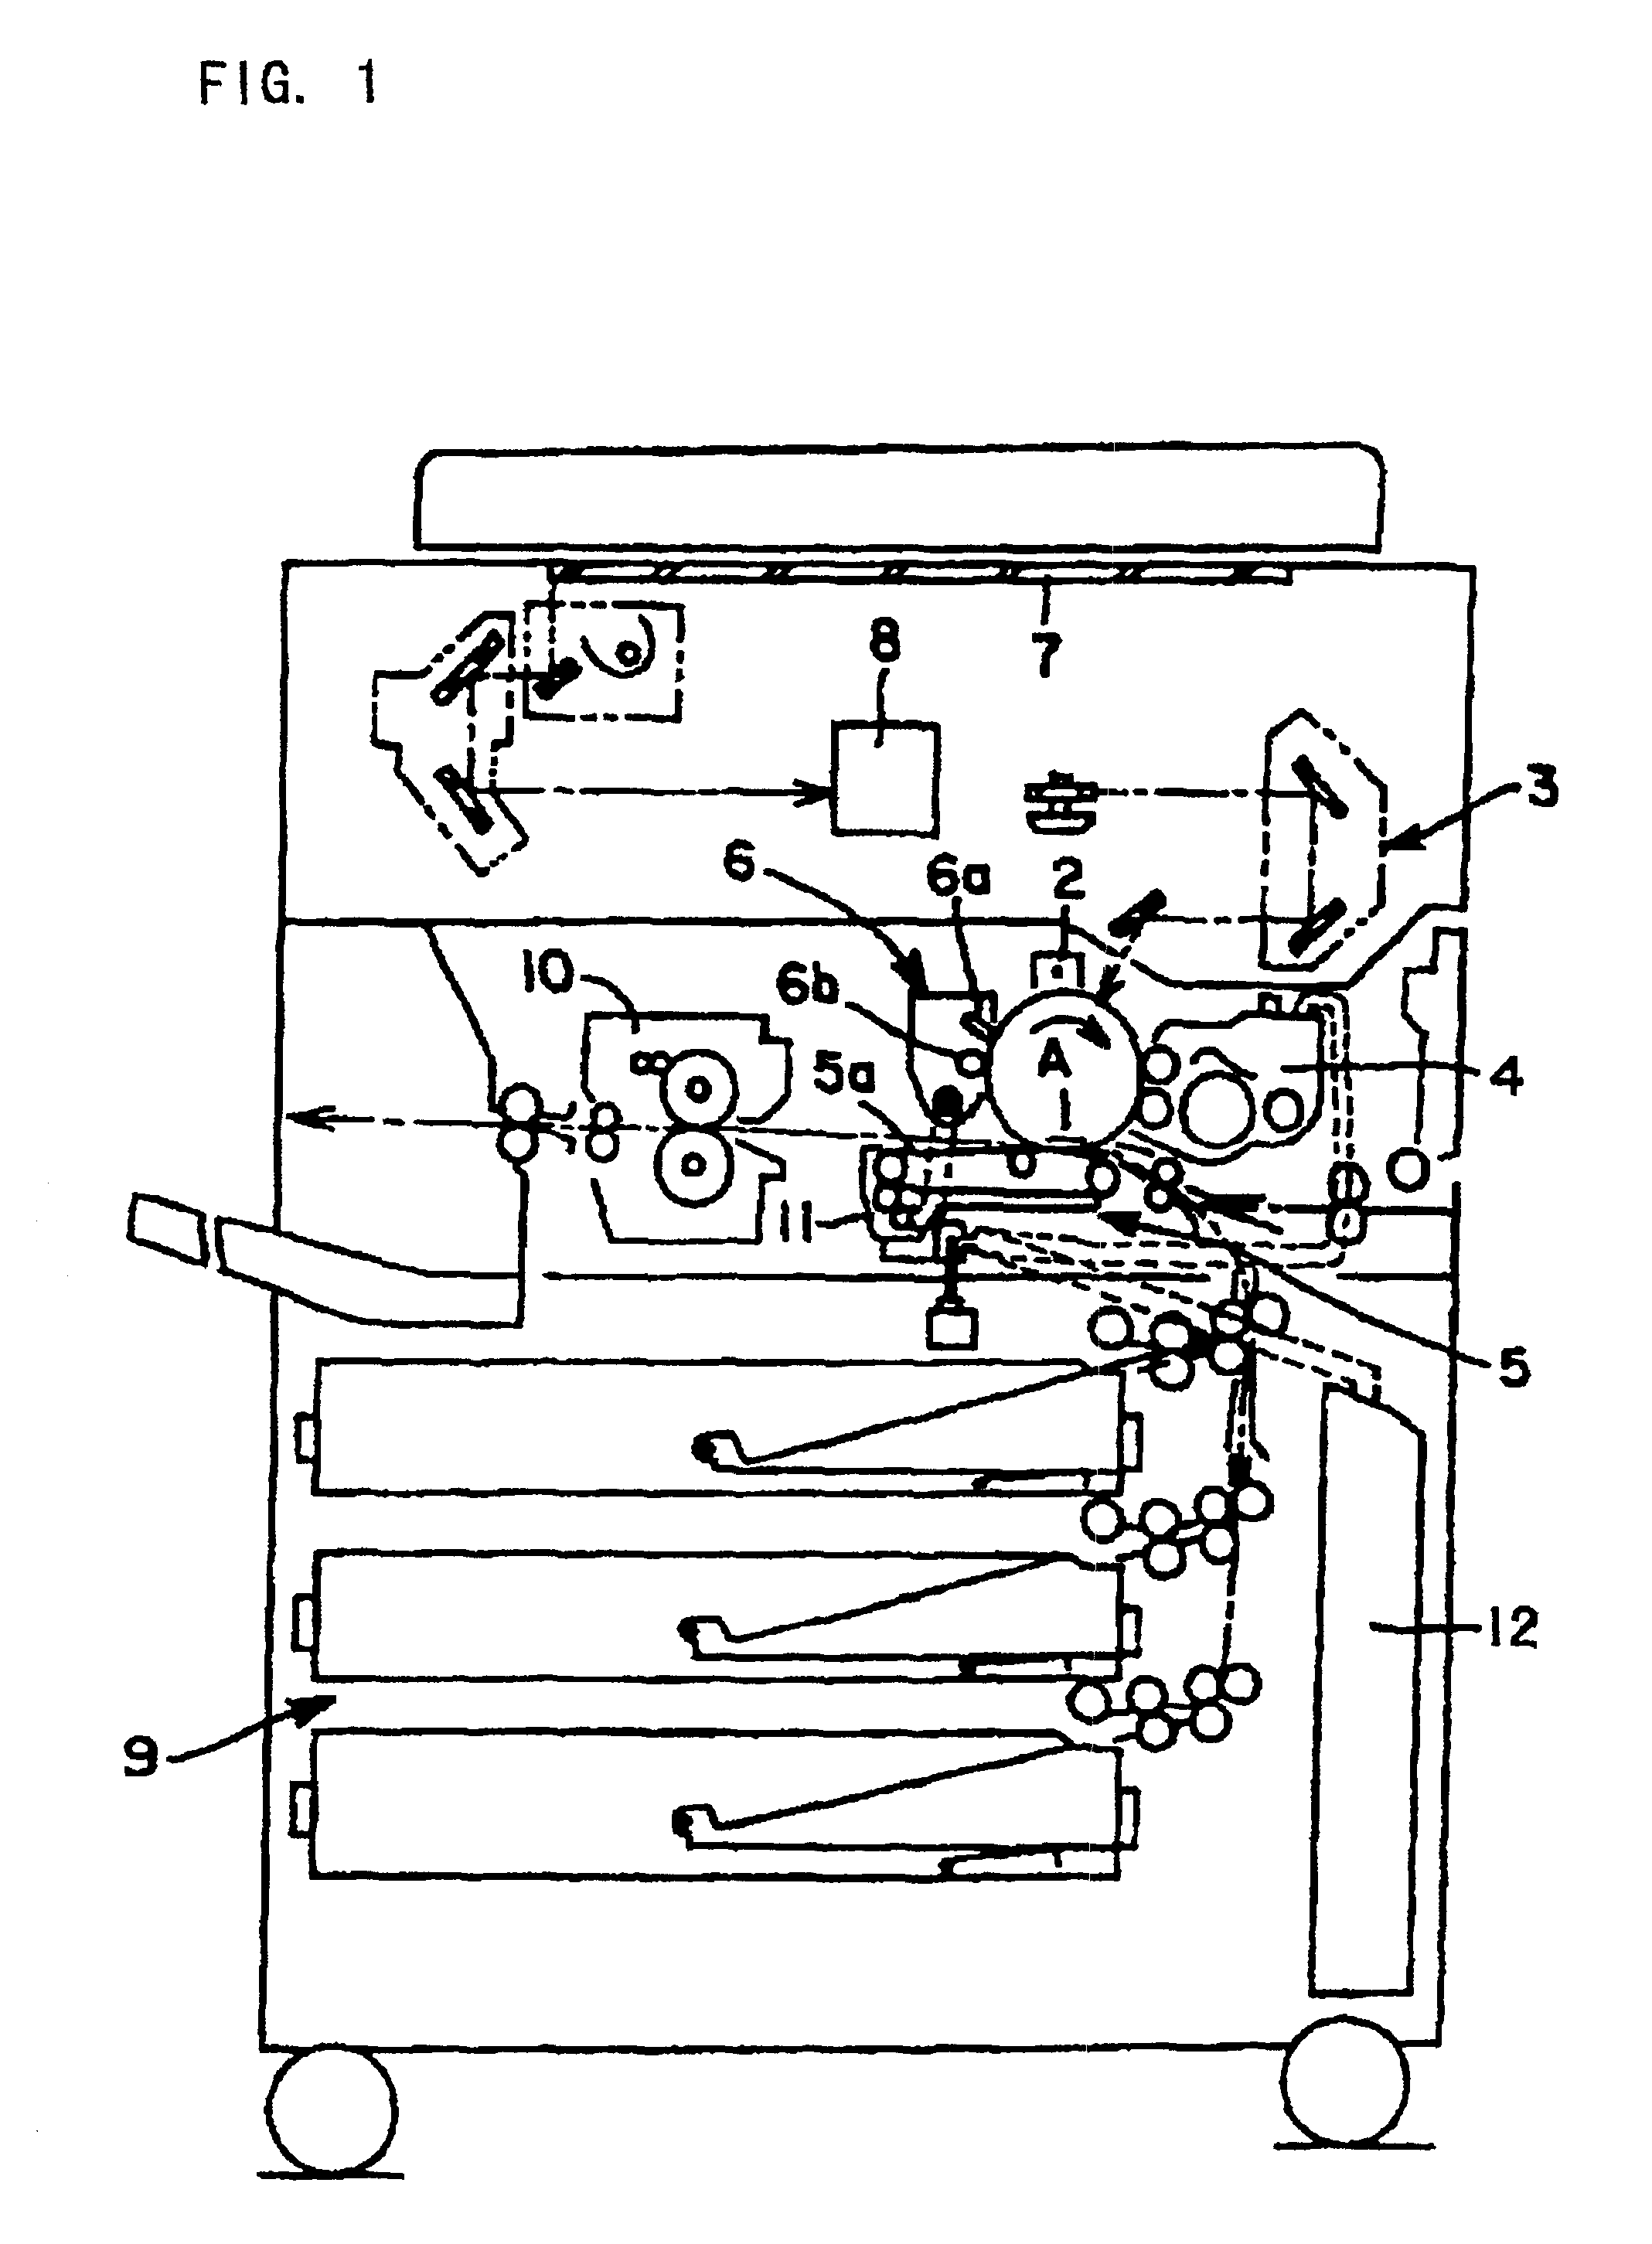 Toner for two-component developer, image forming method and device for developing electrostatic latent image